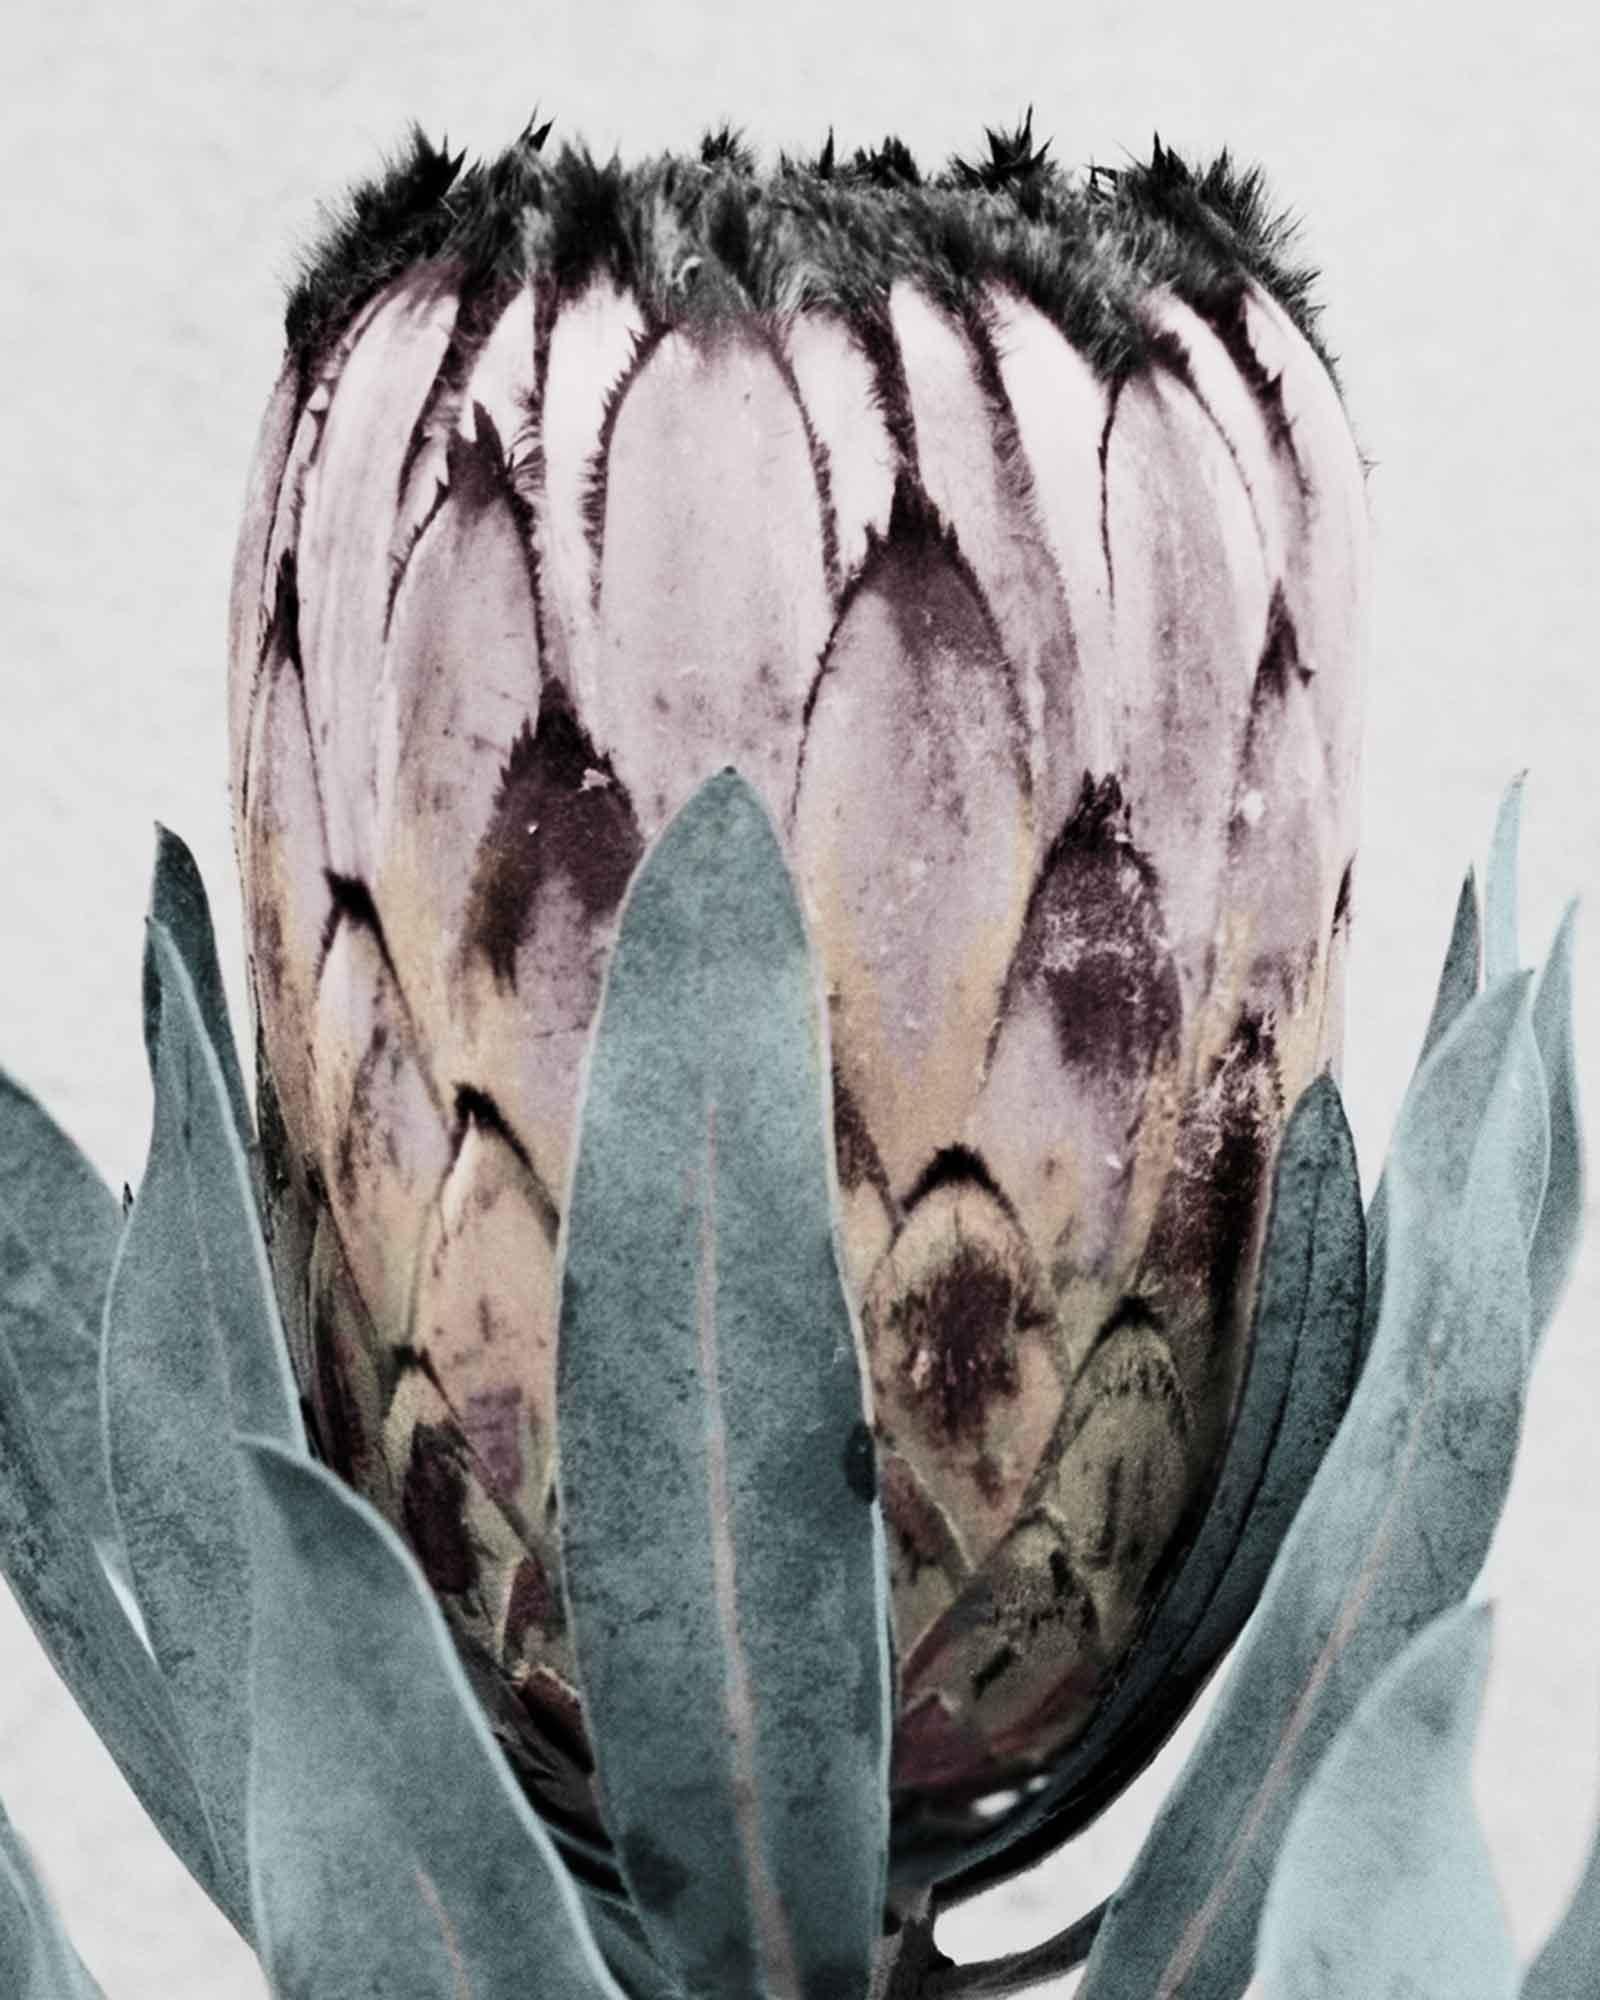 Botanica #17 (Protea Cynaroides) - Contemporary Photograph by Vee Speers